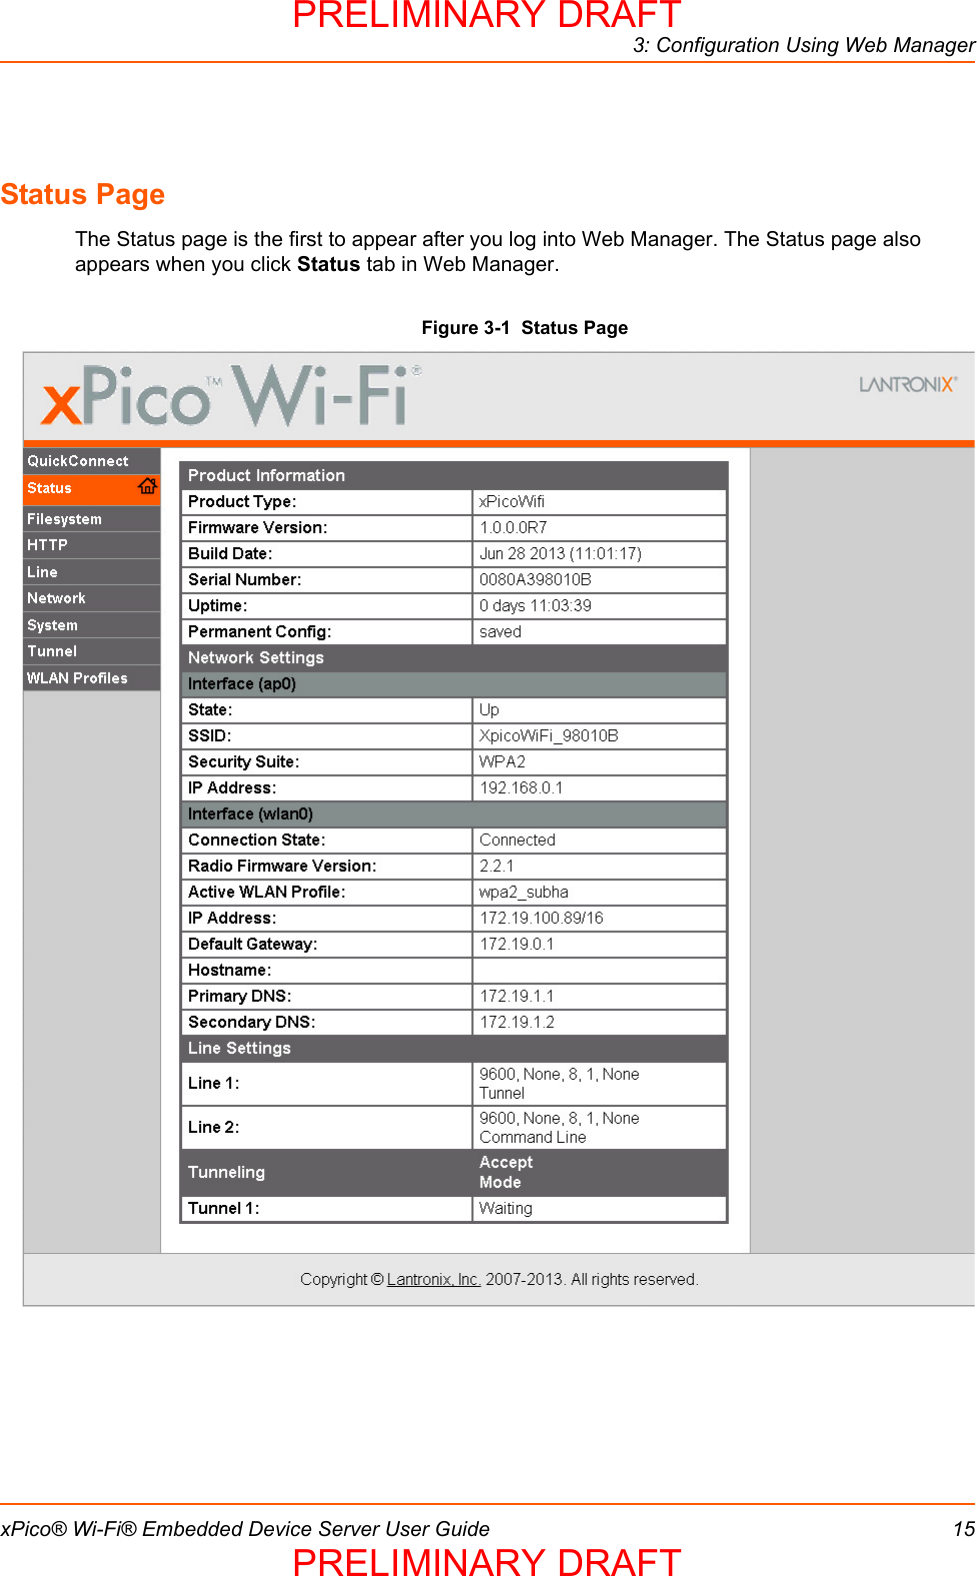 3: Configuration Using Web ManagerxPico® Wi-Fi® Embedded Device Server User Guide 15Status PageThe Status page is the first to appear after you log into Web Manager. The Status page also appears when you click Status tab in Web Manager.Figure 3-1  Status PagePRELIMINARY DRAFTPRELIMINARY DRAFT